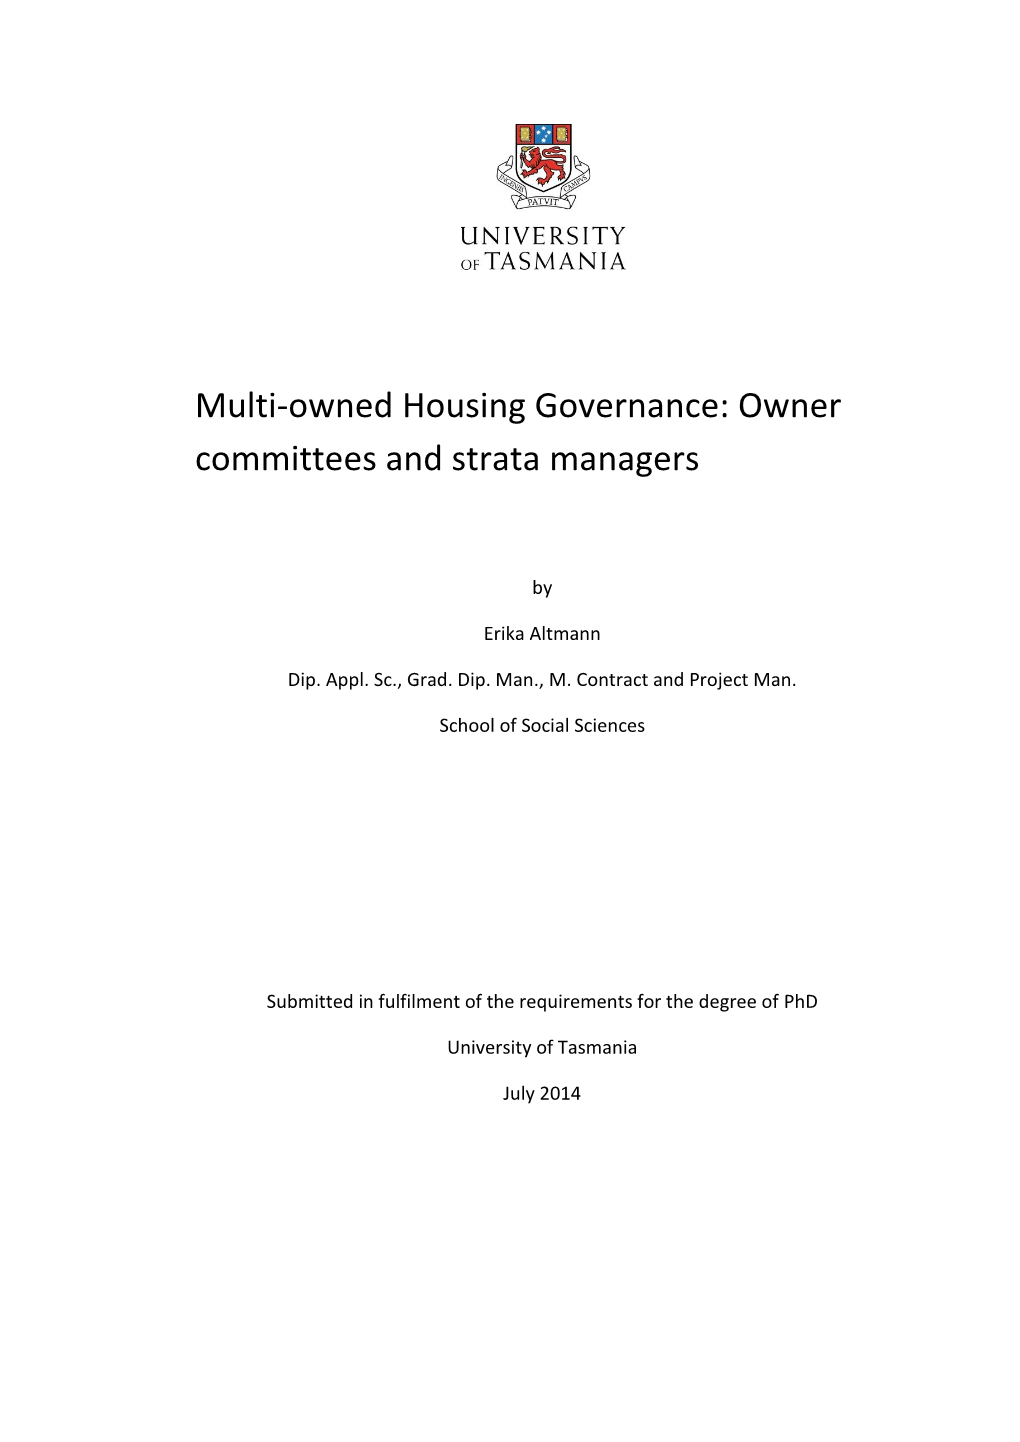 Multi-Owned Housing Governance : Strata Managers and Committees Of